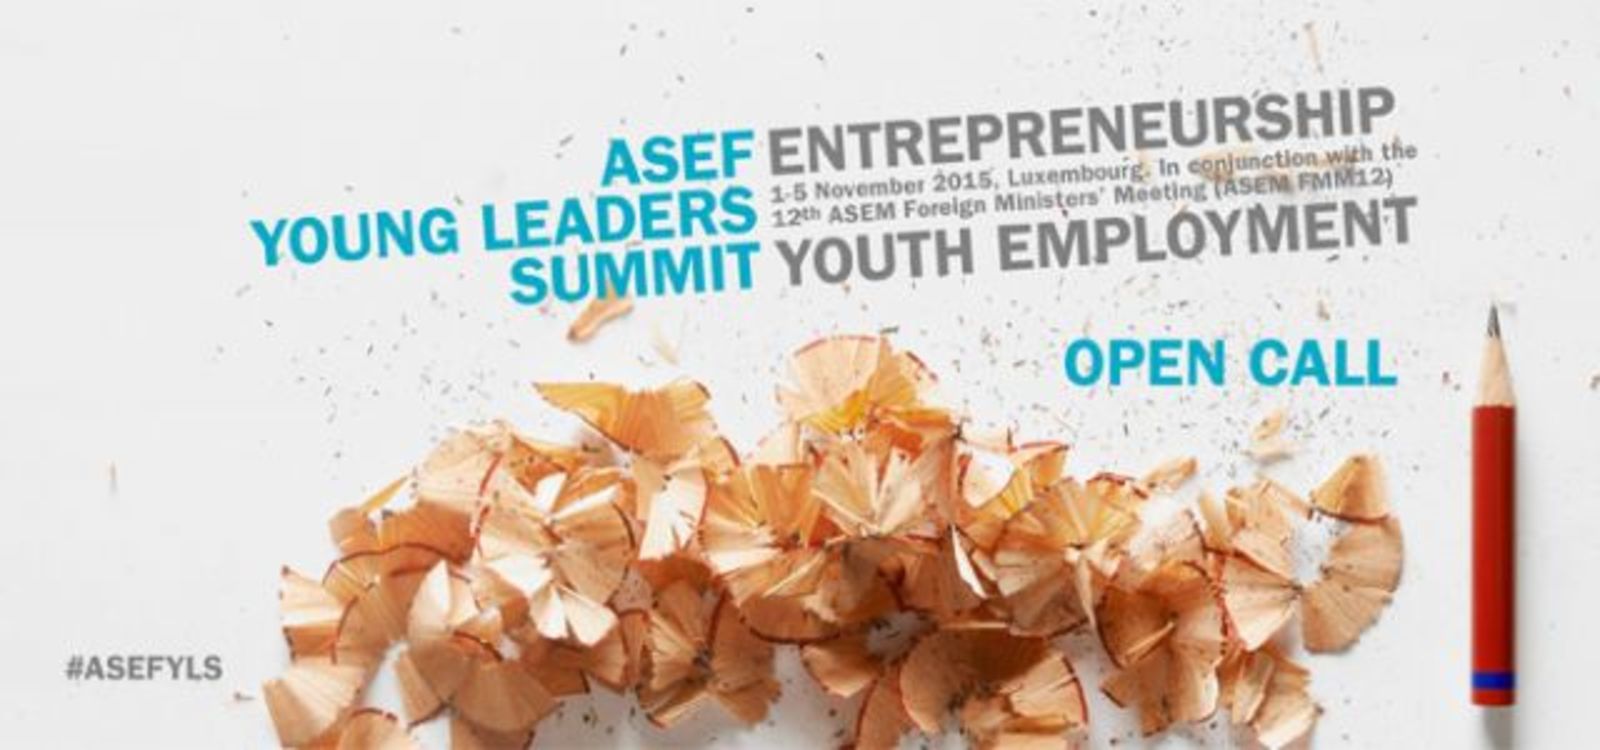 ASEF YOUNG LEADERS SUMMIT 2015